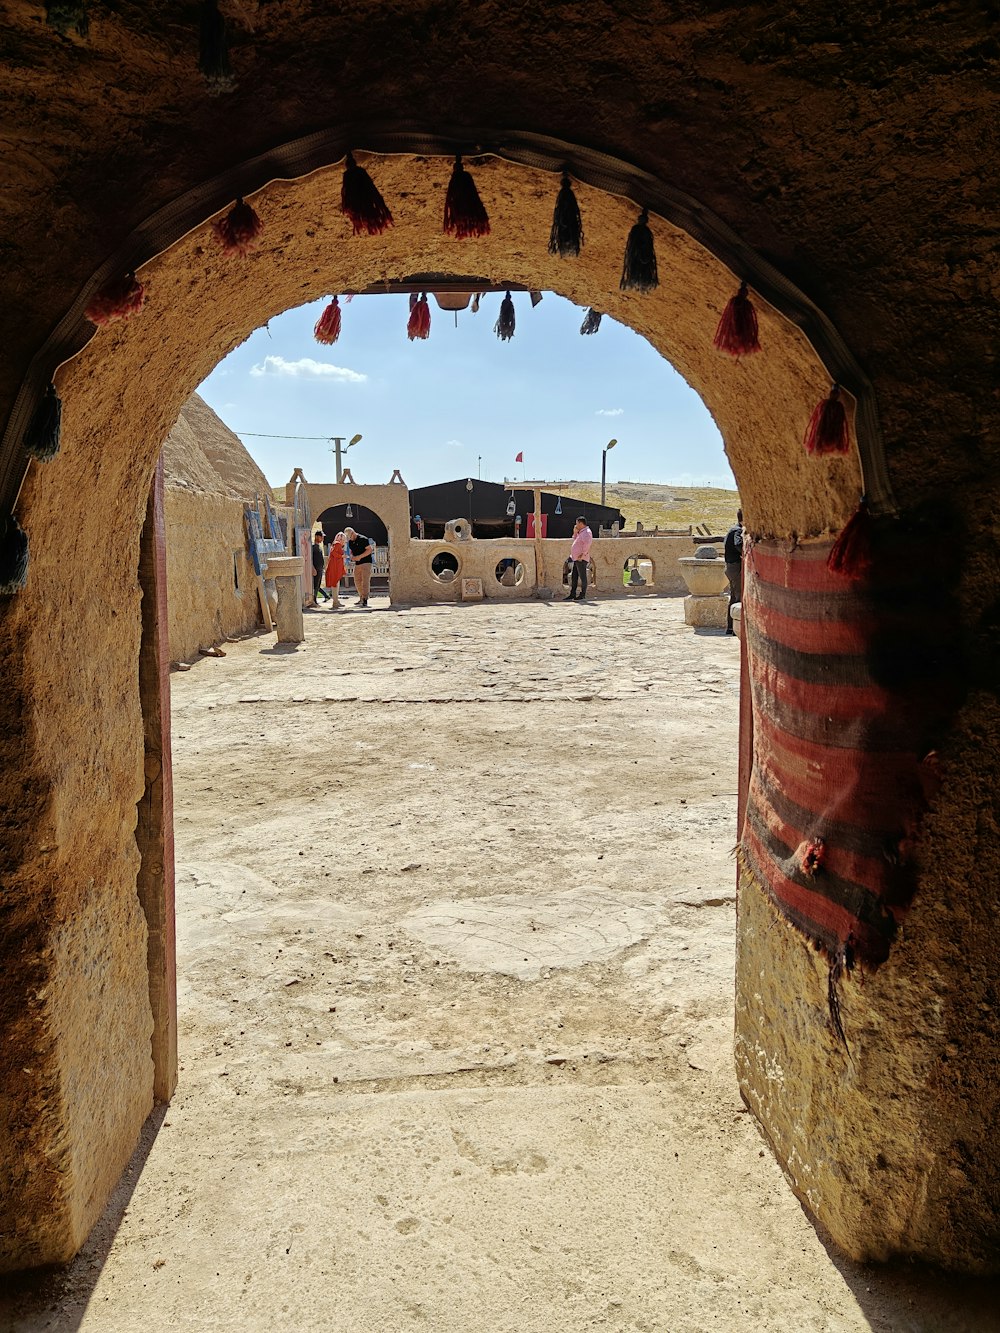 an archway leading into a desert with a sky background